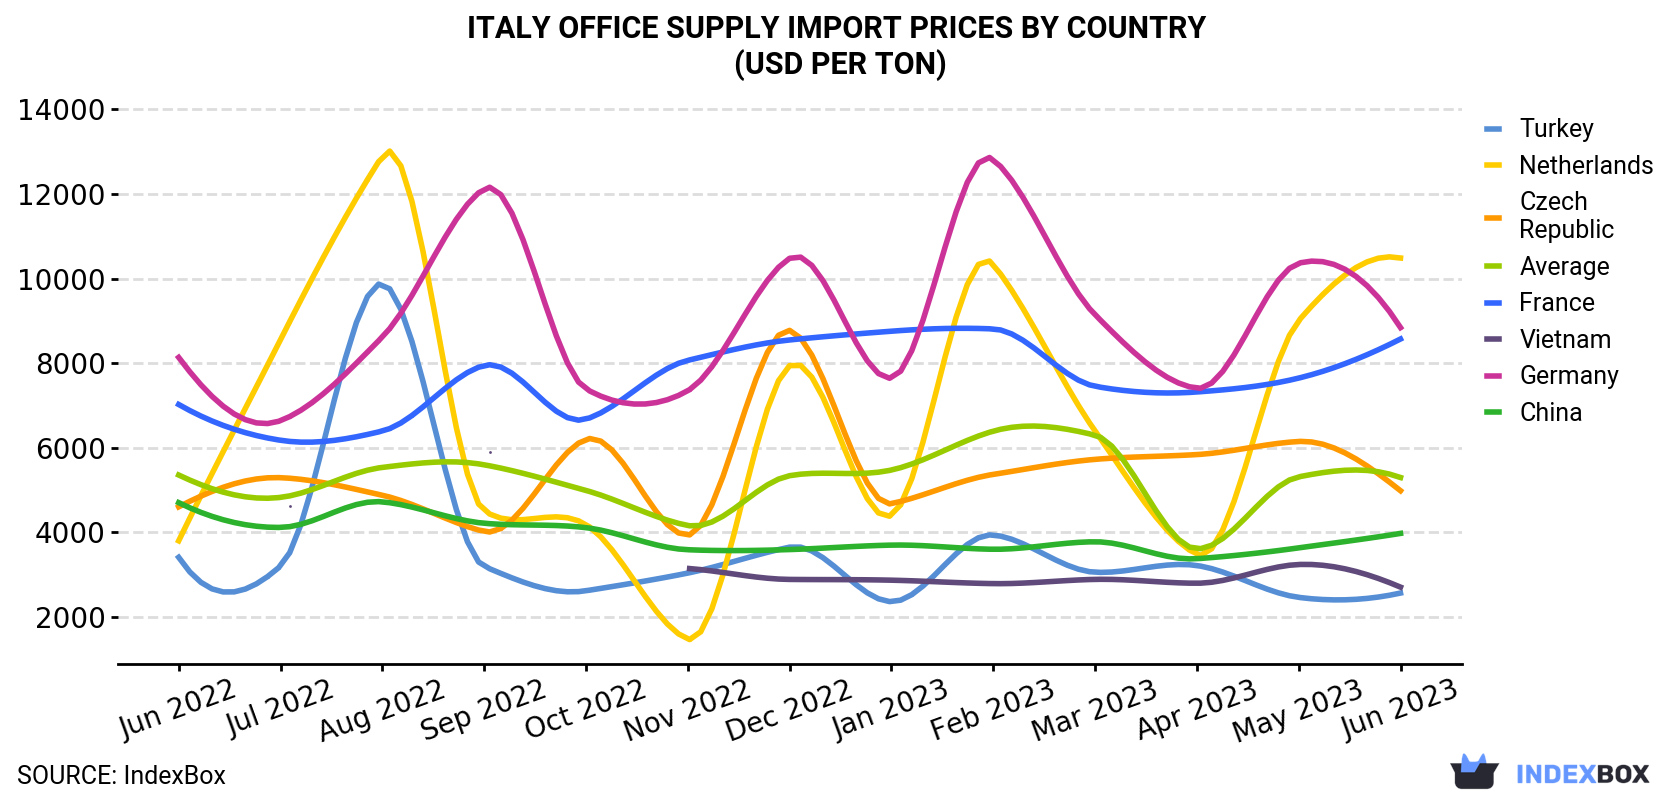 Italy Office Supply Import Prices By Country (USD Per Ton)